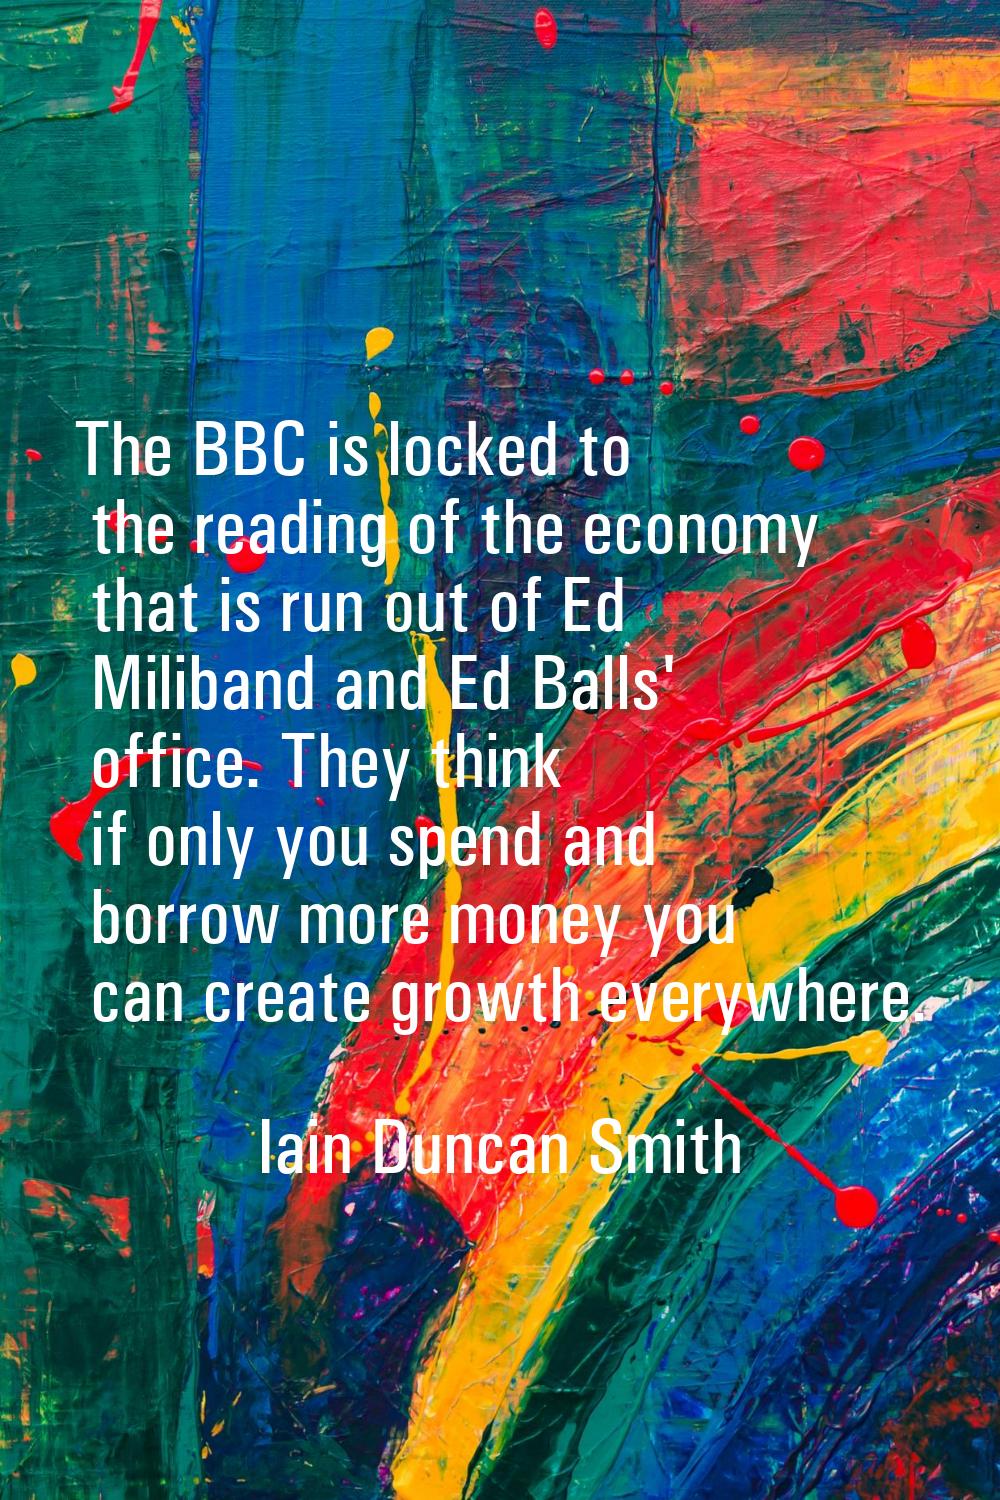 The BBC is locked to the reading of the economy that is run out of Ed Miliband and Ed Balls' office